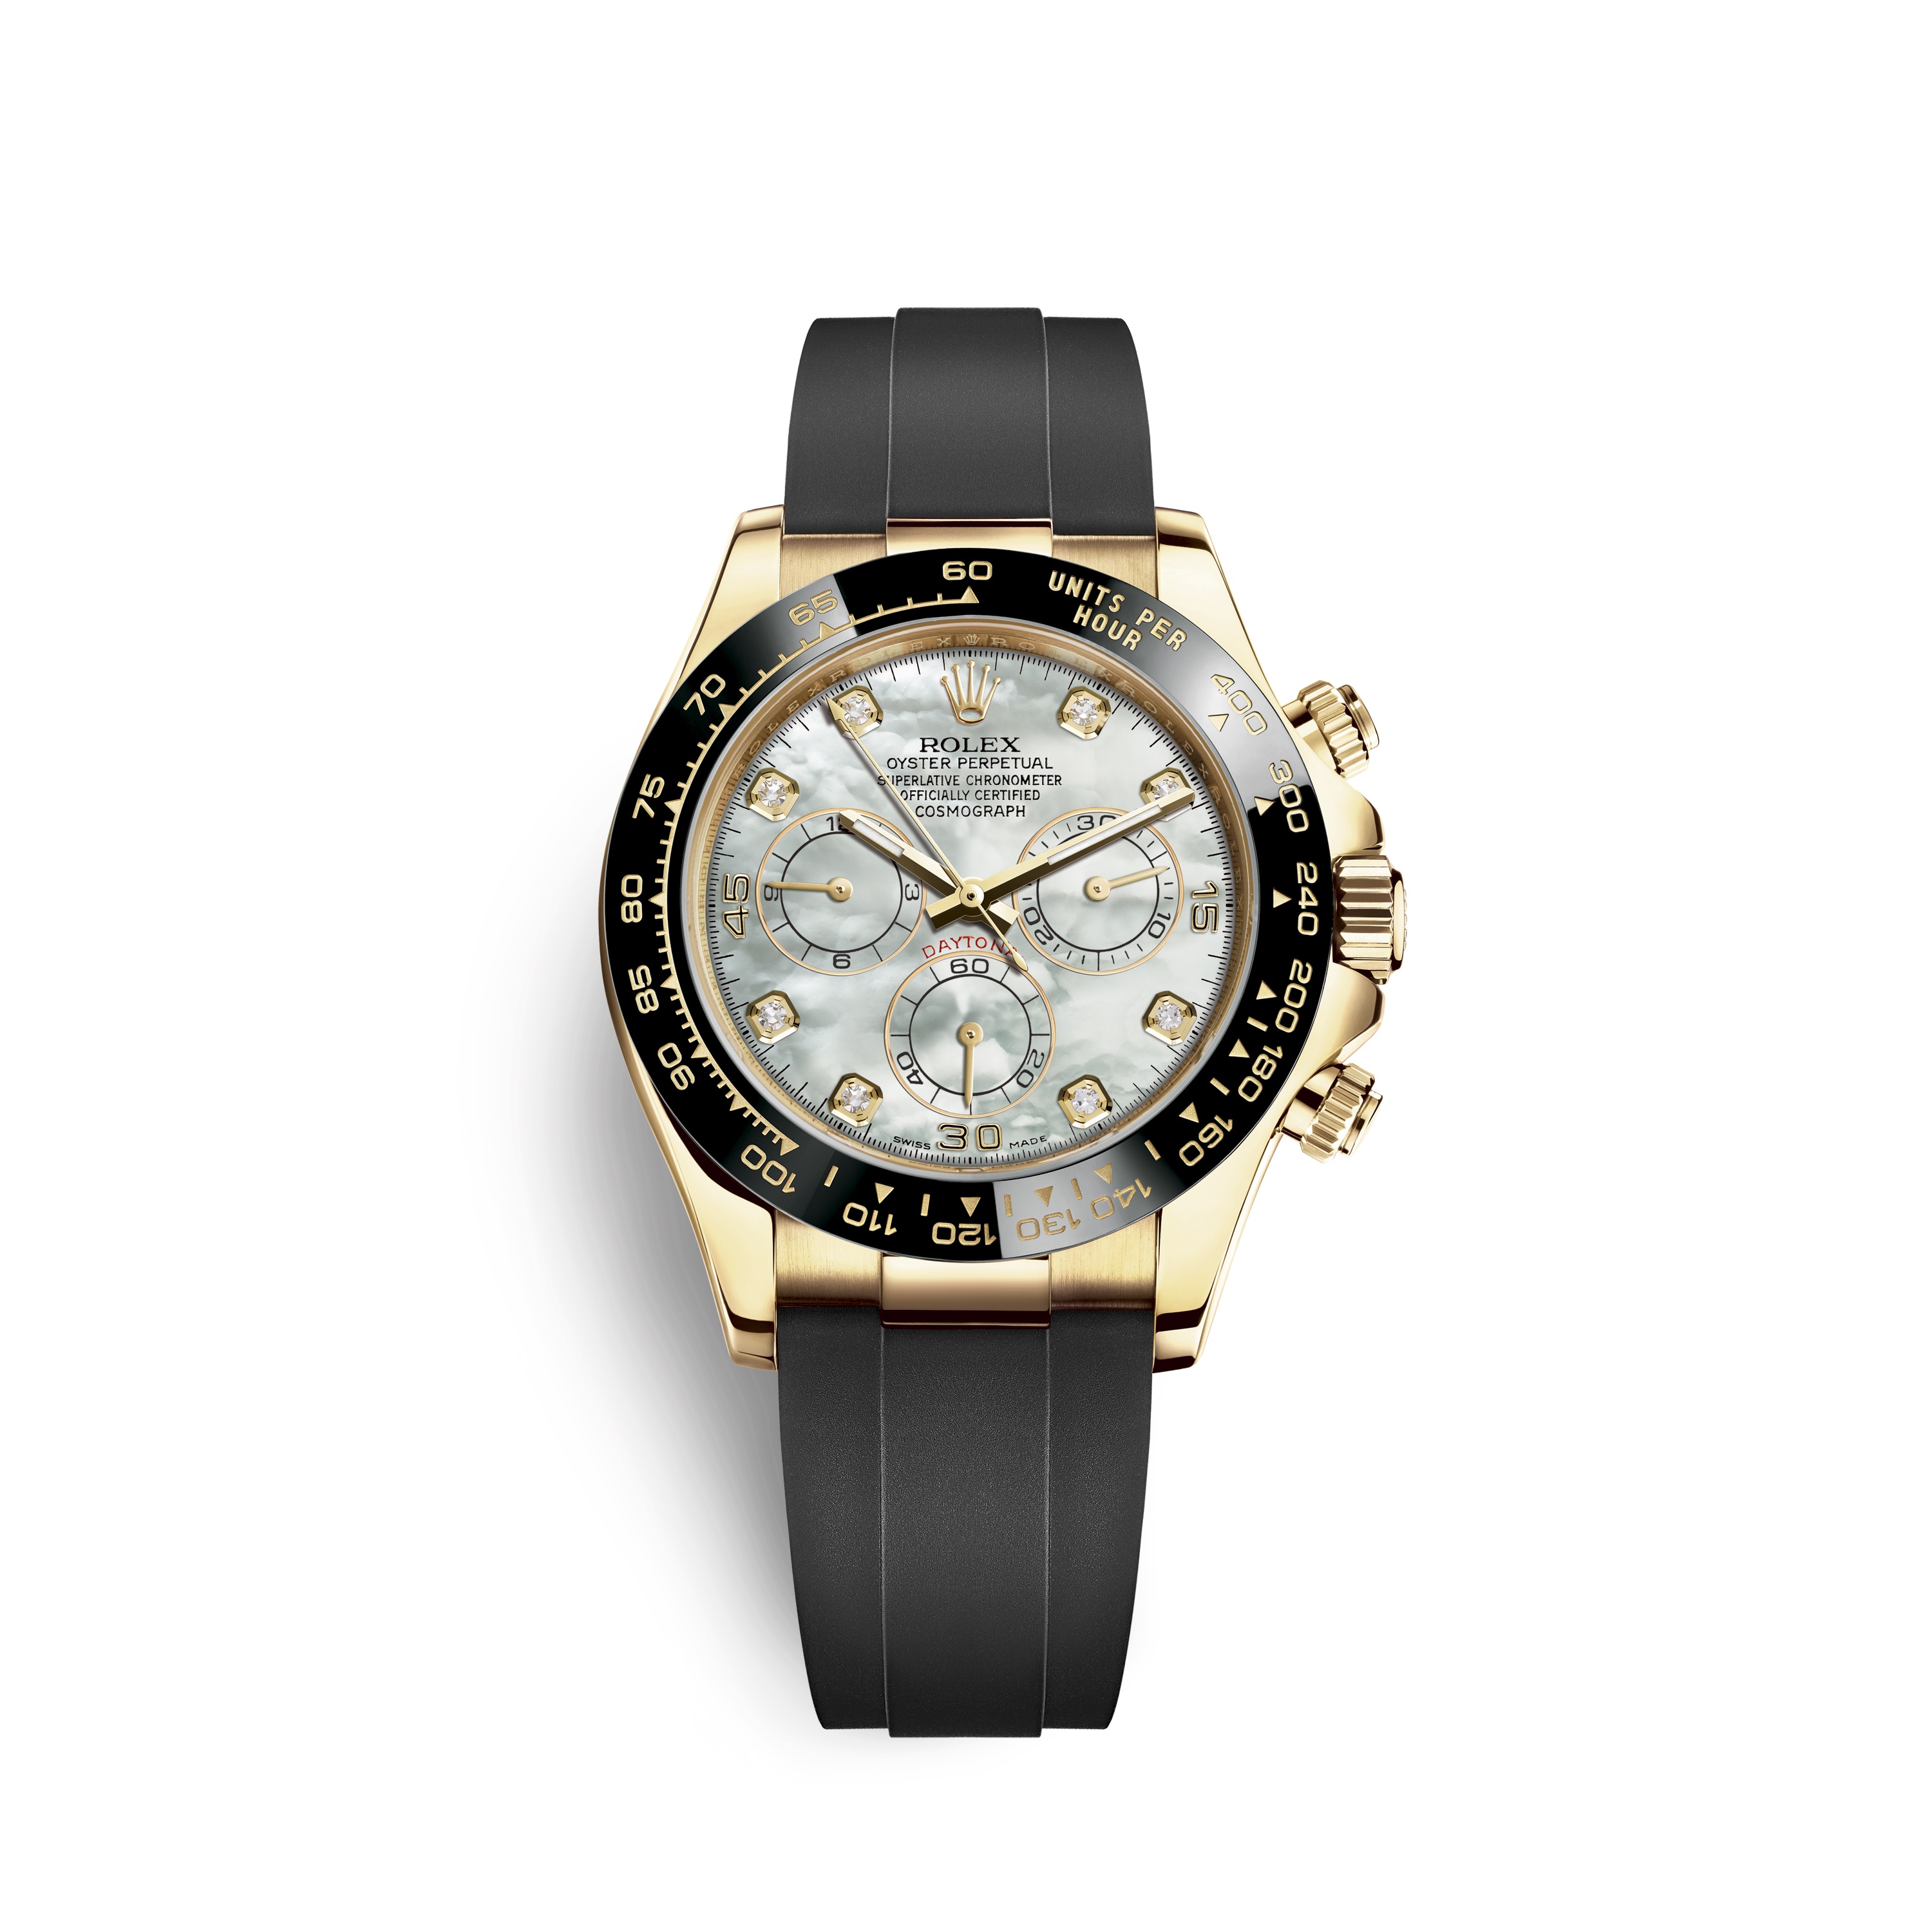 Cosmograph Daytona 116518LN Gold Watch (White Mother-of-Pearl Set with Diamonds)